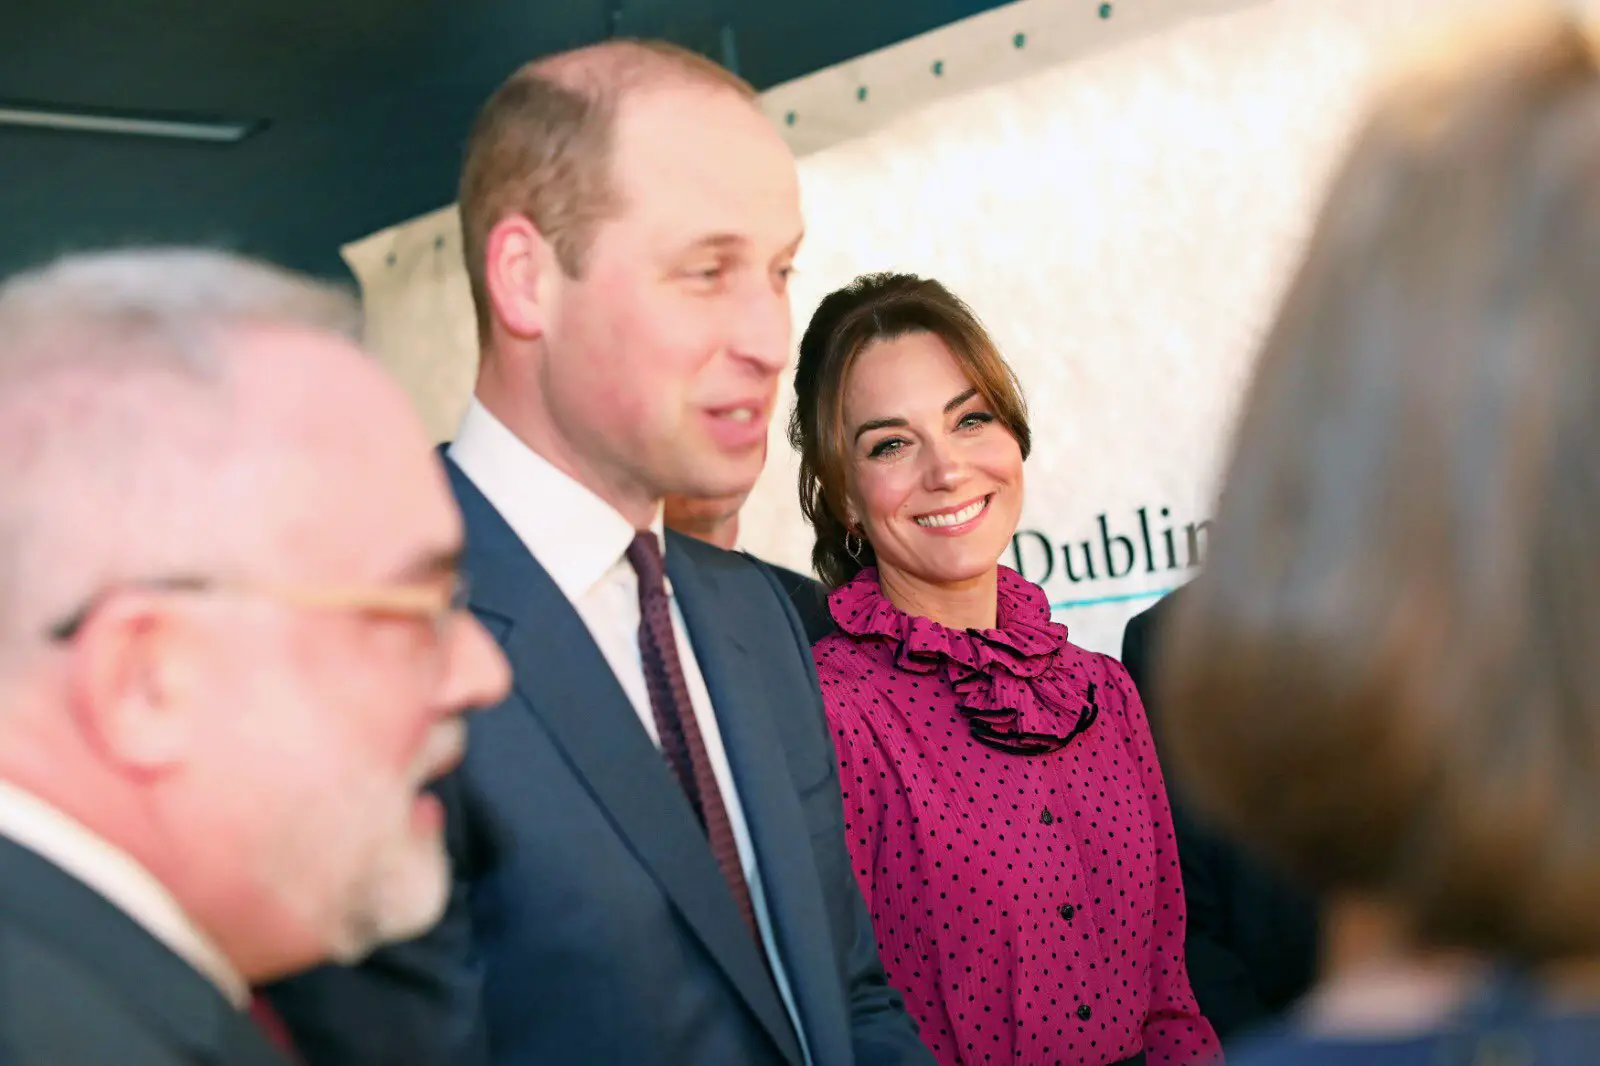 Duke and Duchess of Cambridge attended the reception hosted at he Museum of Literature Ireland